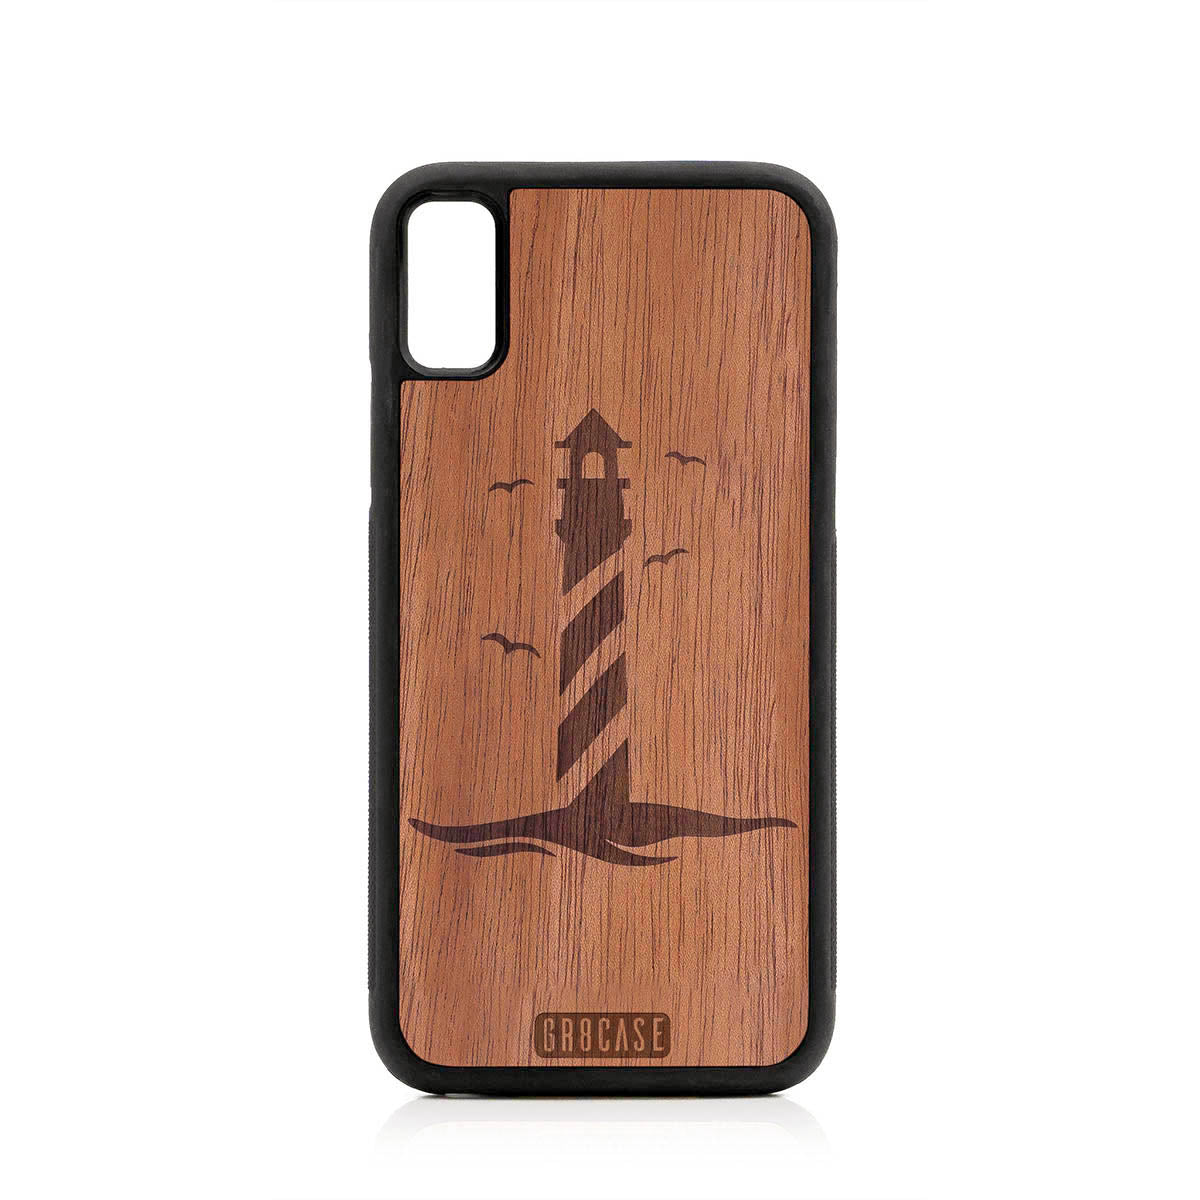 Lighthouse Design Wood Case For iPhone X/XS